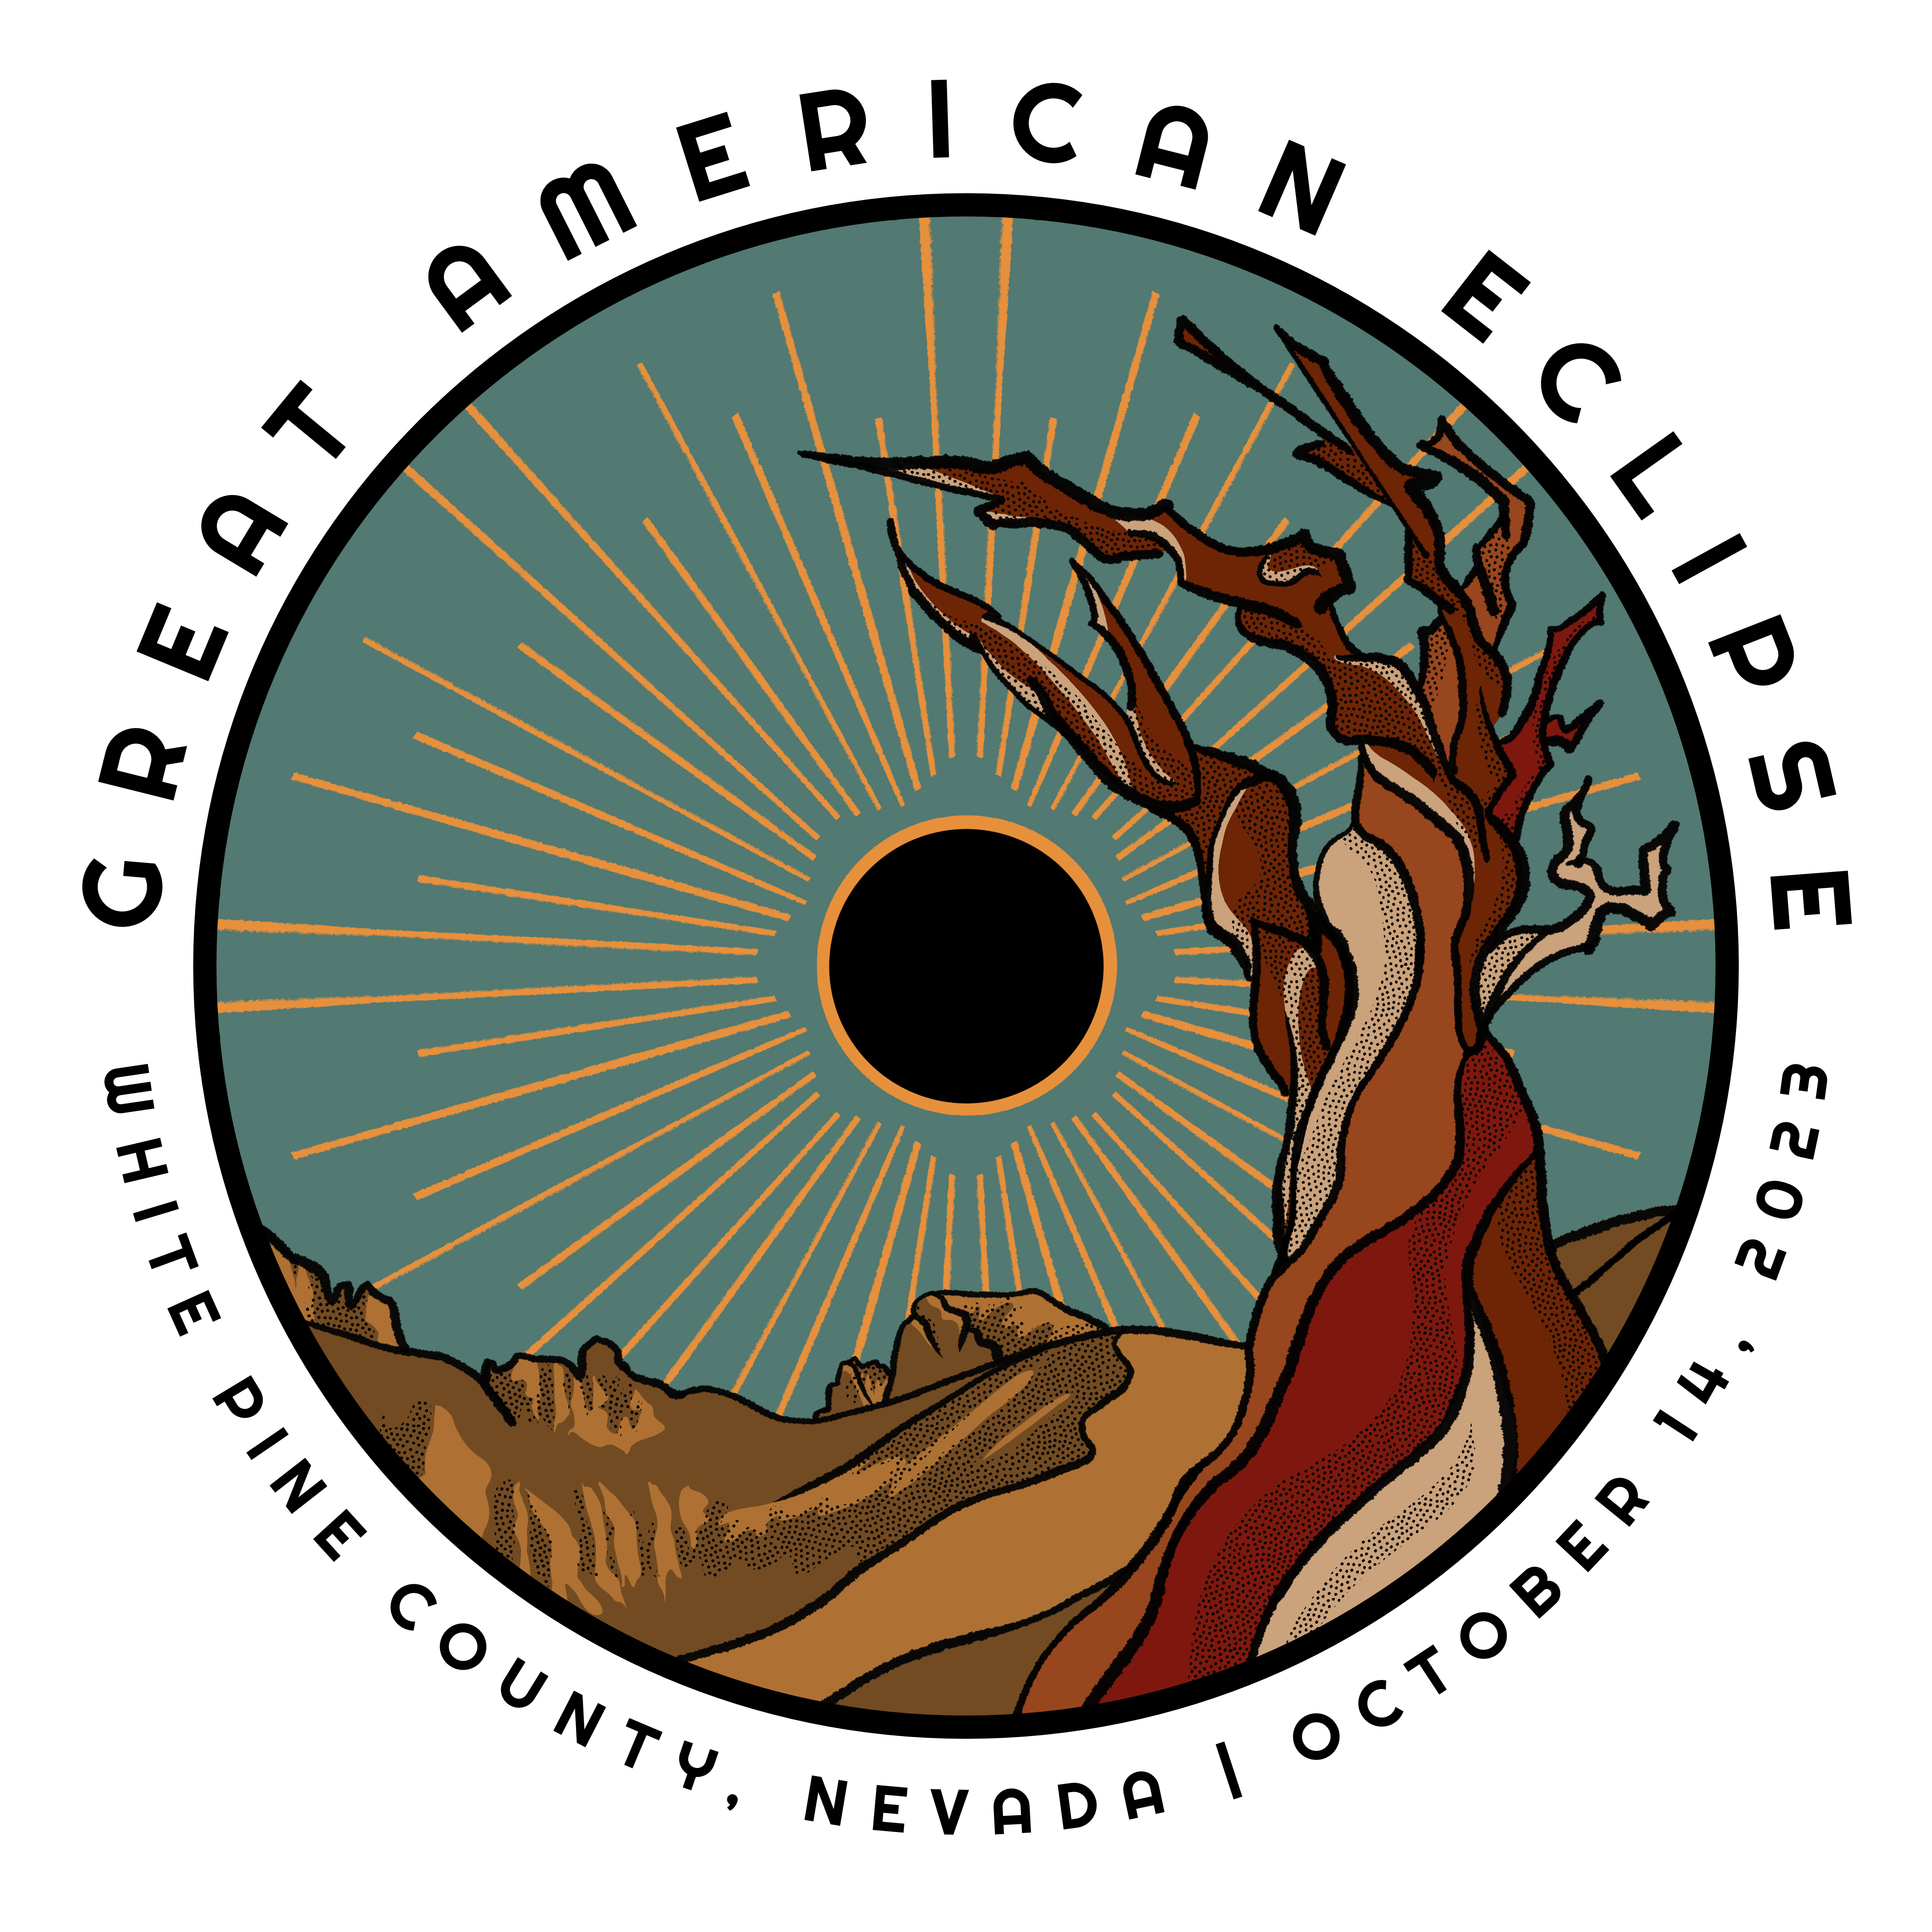 An illustrated brown bristlecone pine stand to the front of a black circle with a thin yellow border and yellow rays emerging from it at various lengths. Text surrounds the circular image saying "Great American Eclipse" above and "White Pine County" below